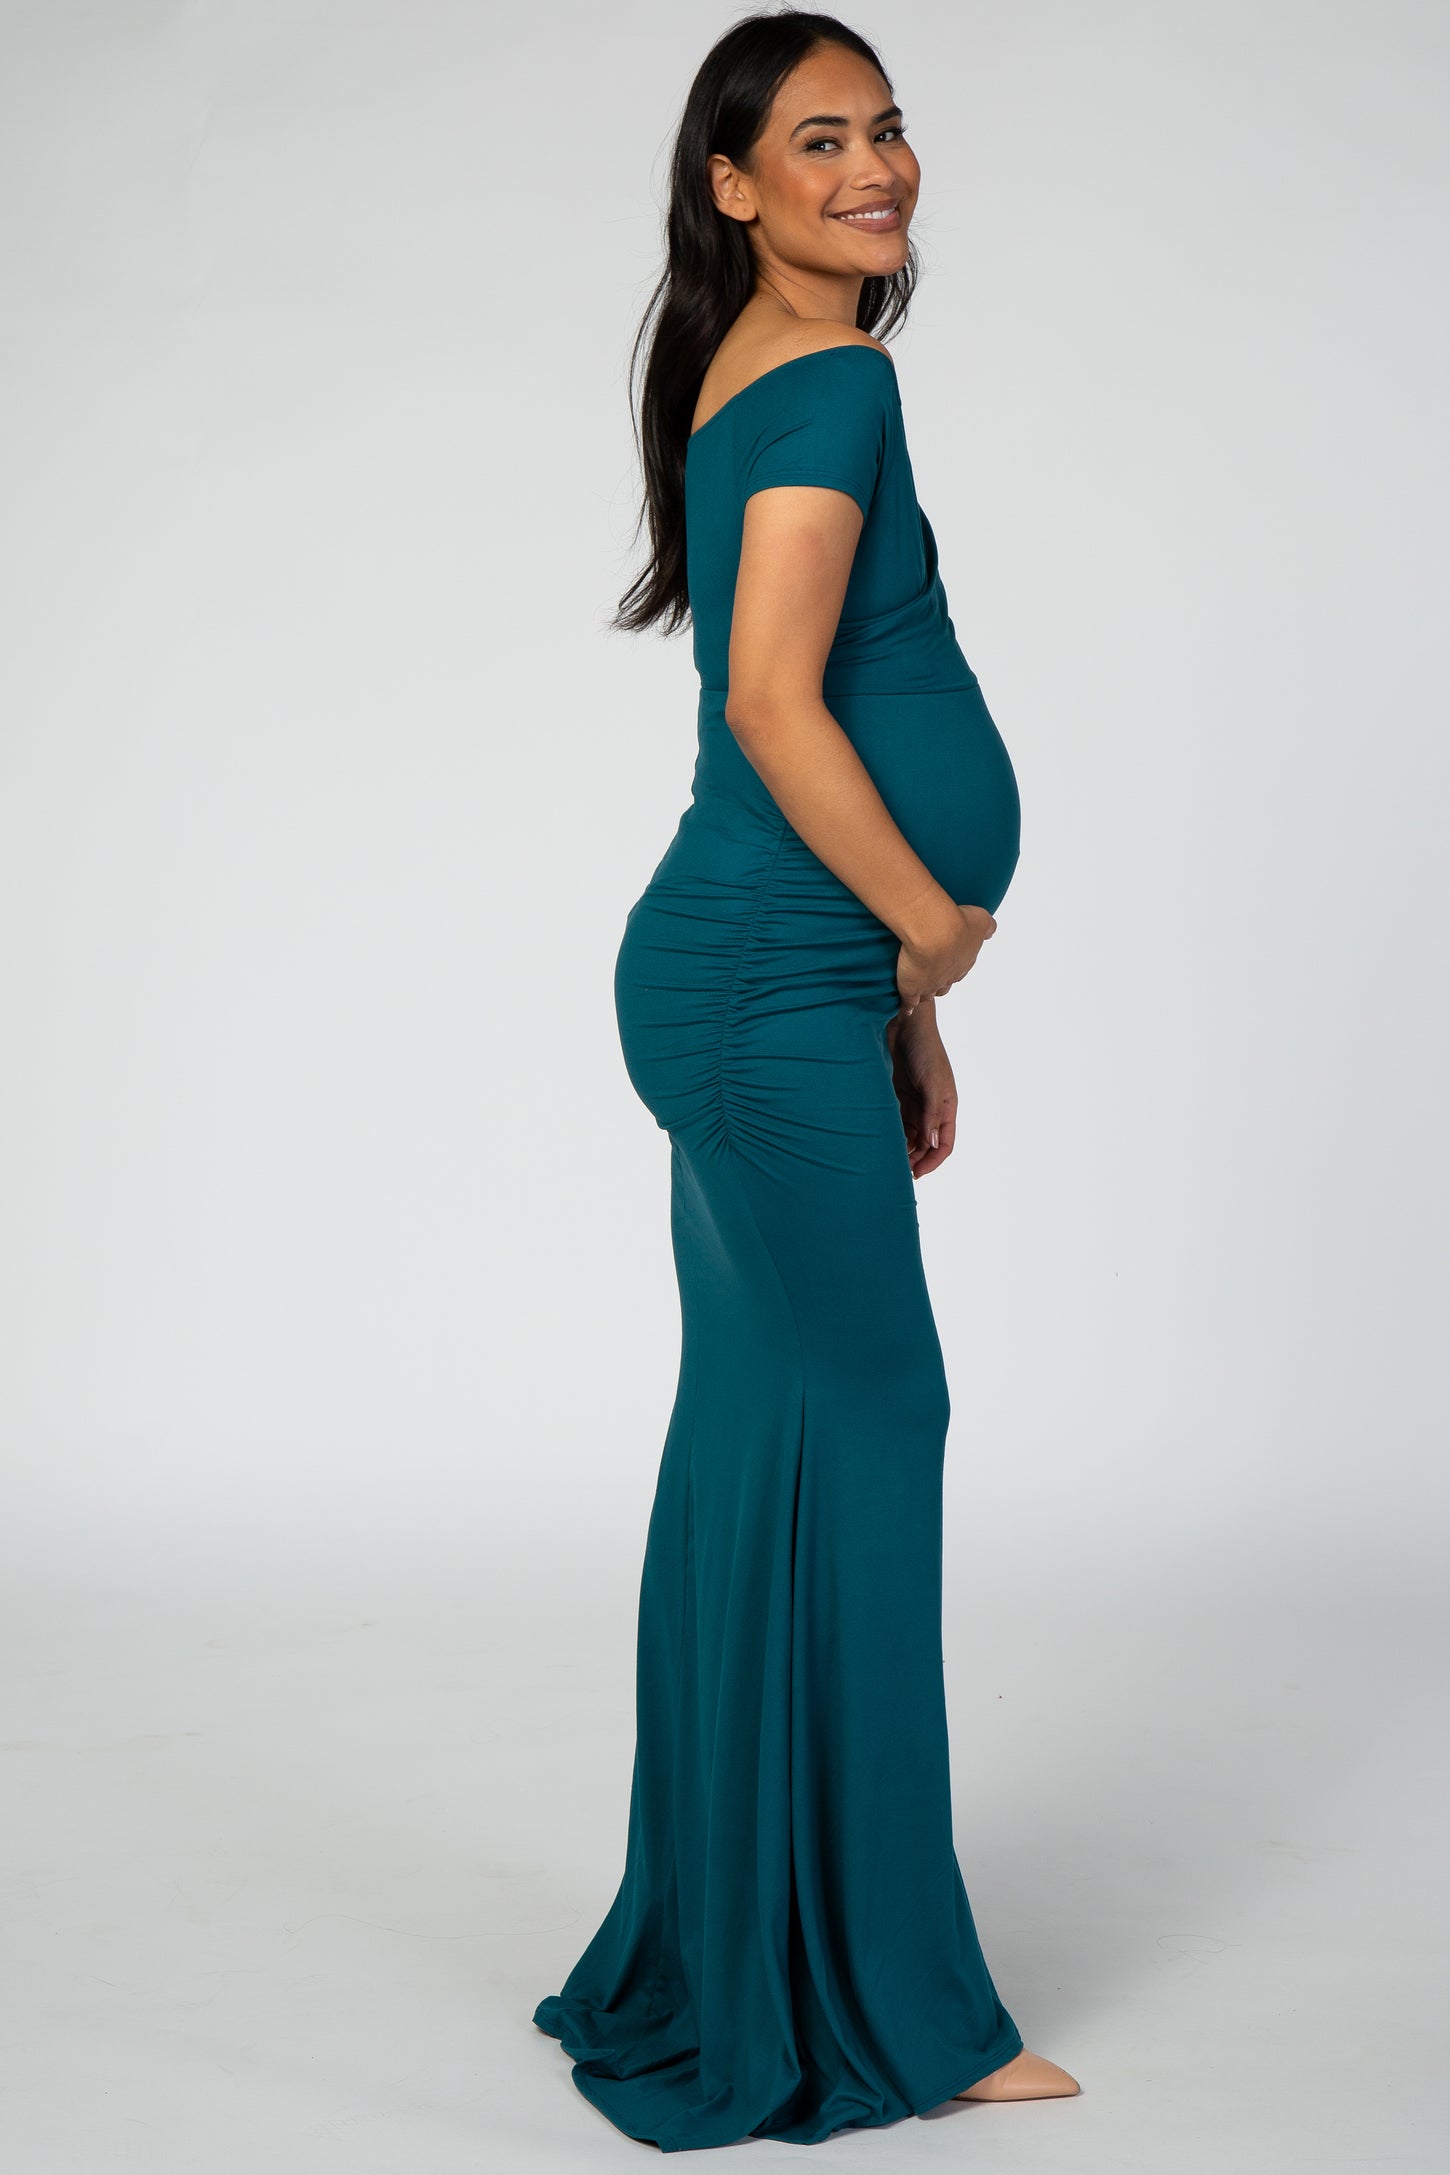 Emerald Off Shoulder Wrap Maternity Photoshoot Gown/Dress